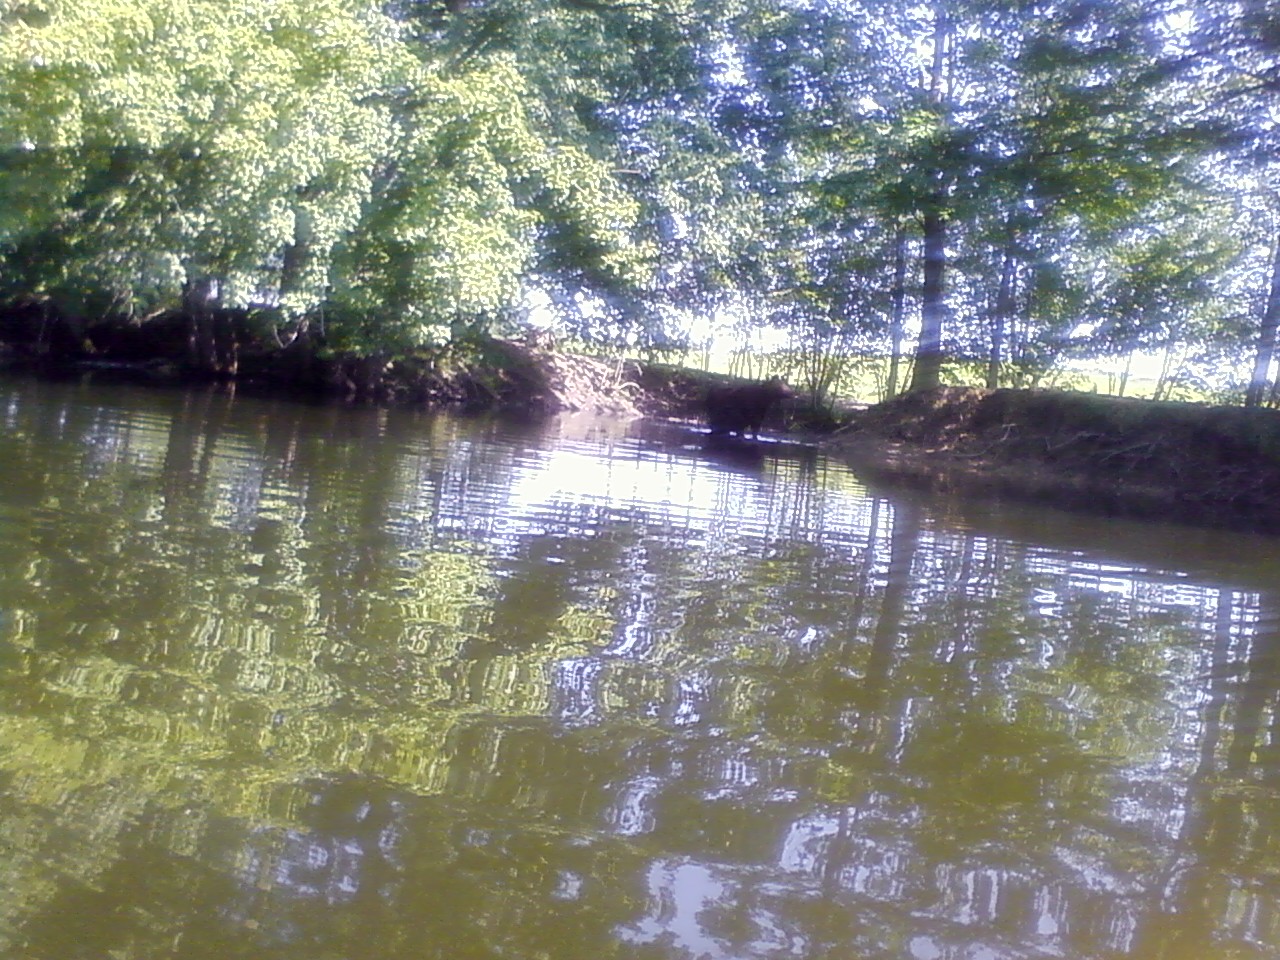 This is another picture that i got when i was fishing and saw the cows.
It is cool.